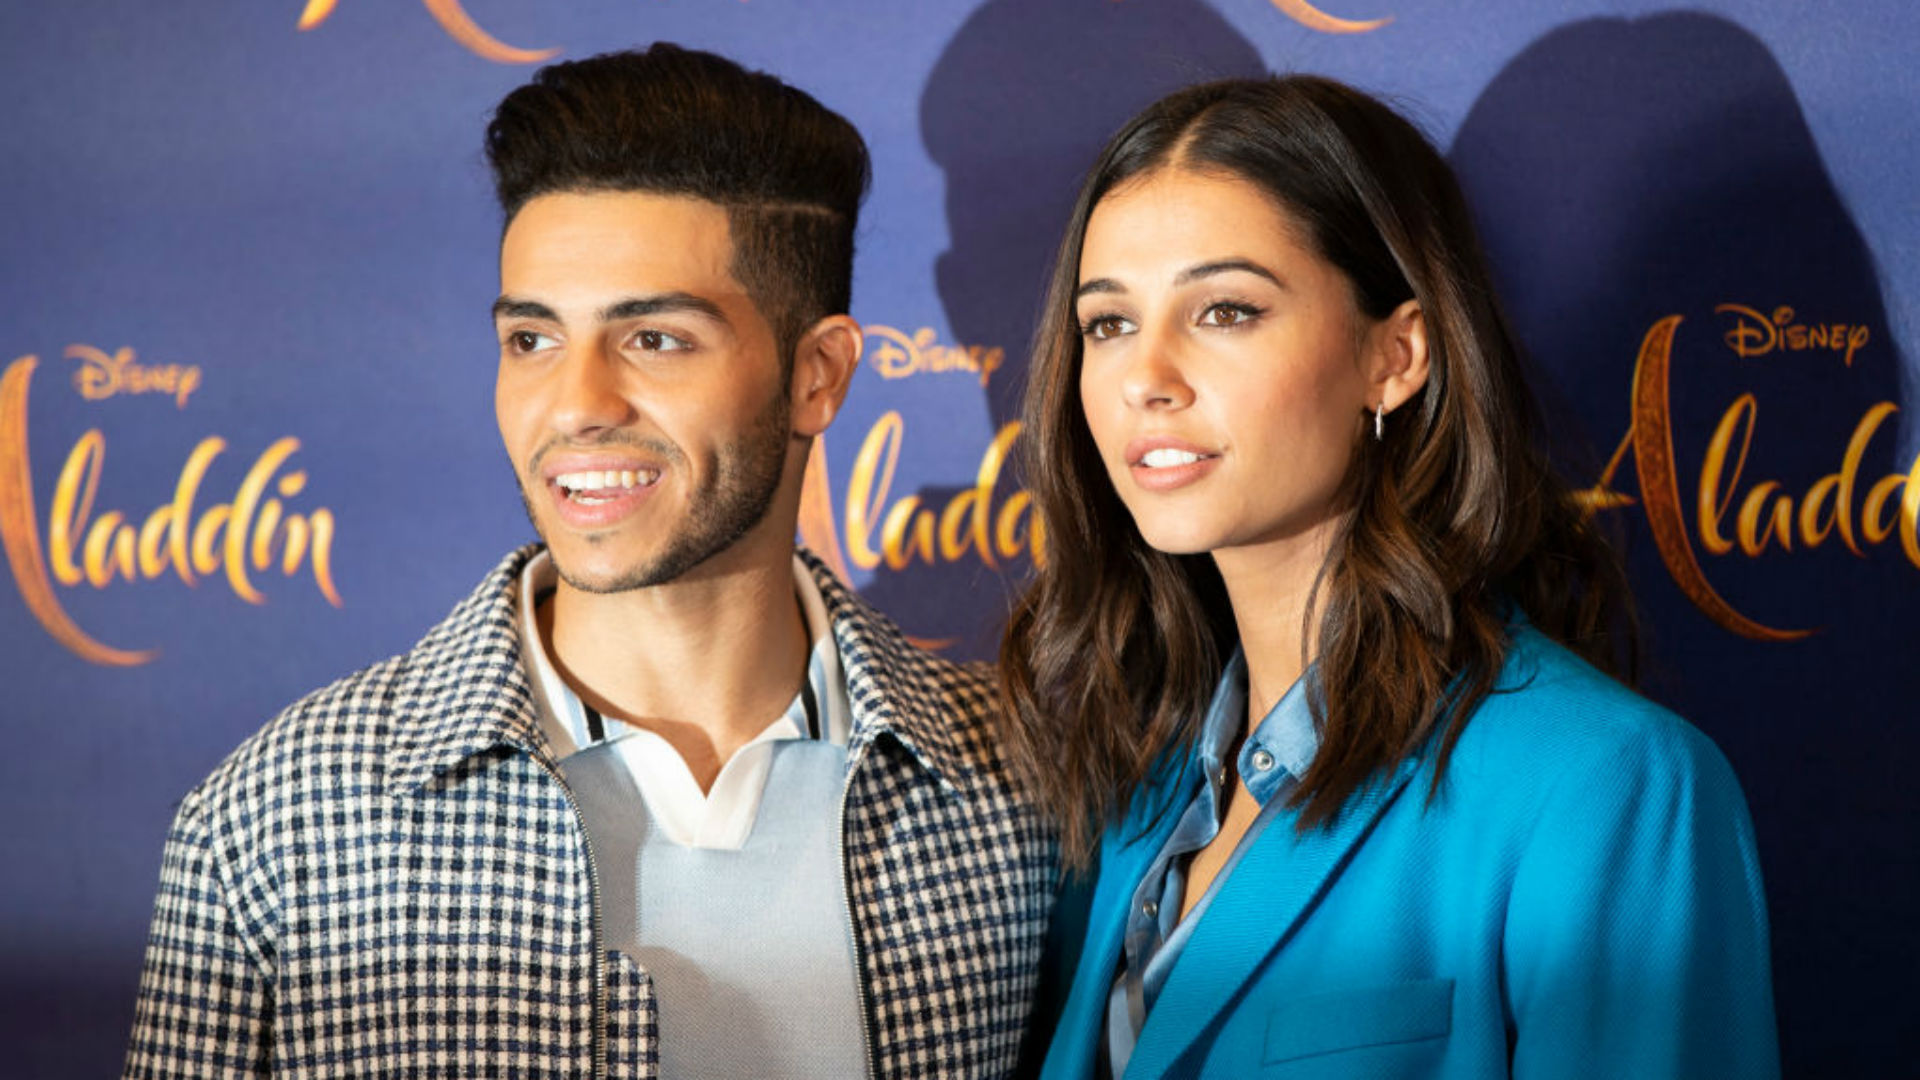 Aladdin A Whole New World For Diversity In Hollywood